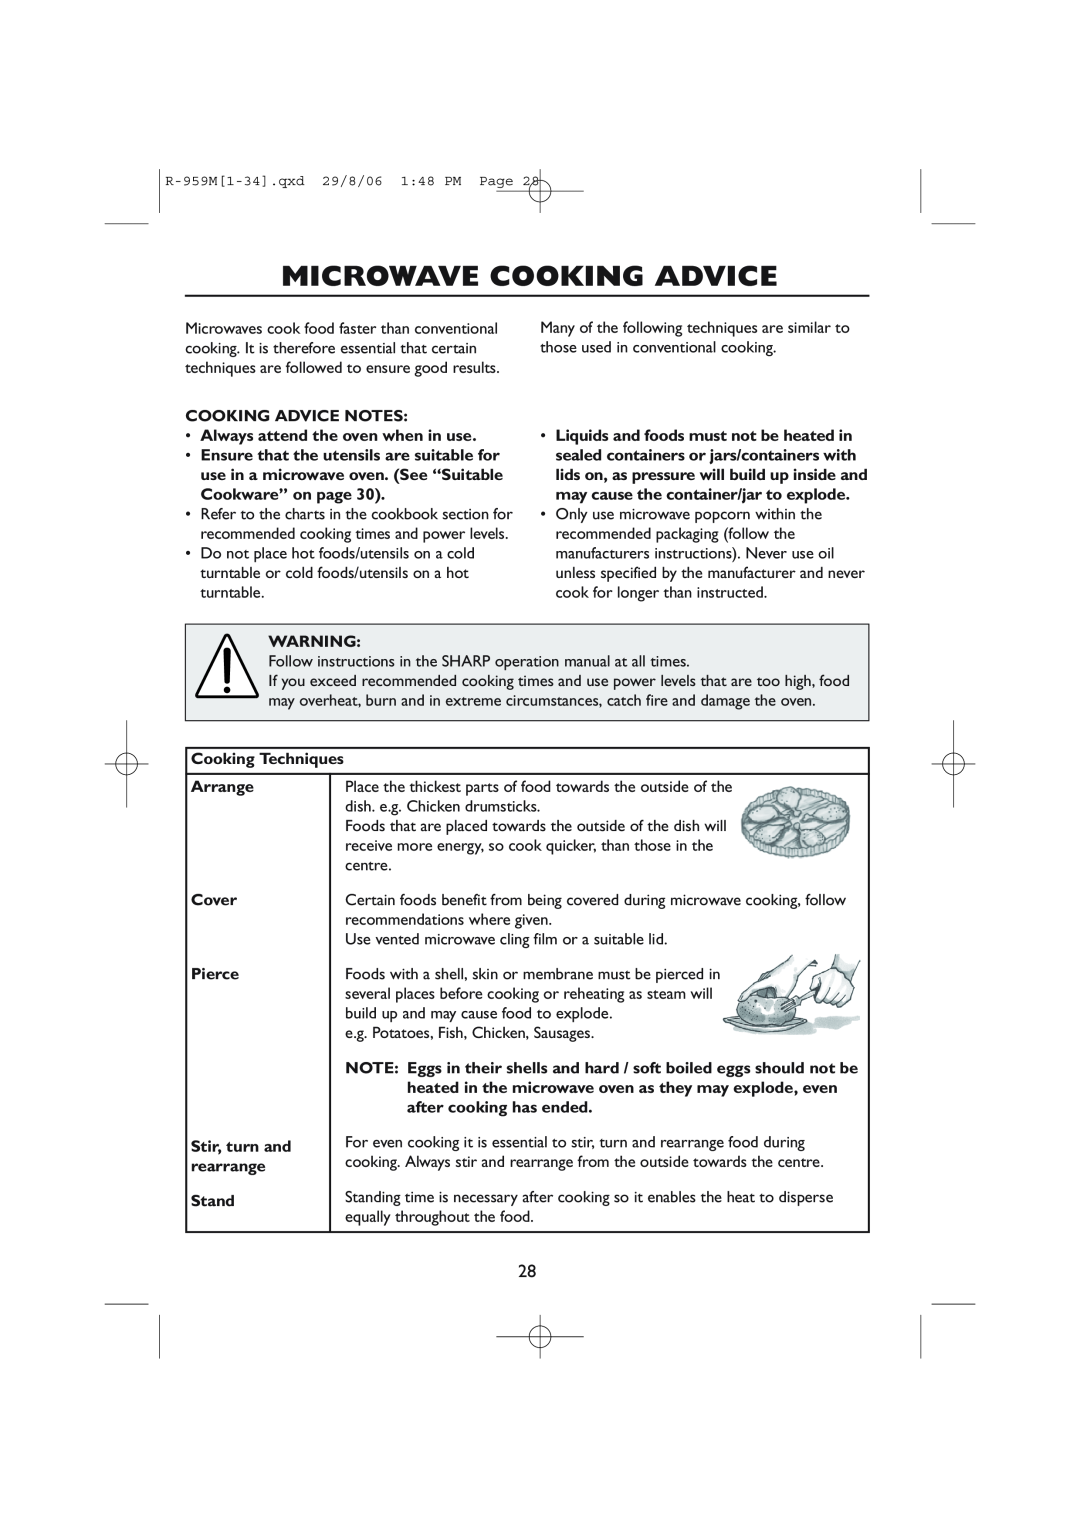 Sharp R-98STM-A Microwave Cooking Advice, COOKING ADVICE NOTES Always attend the oven when in use, Cooking Techniques 